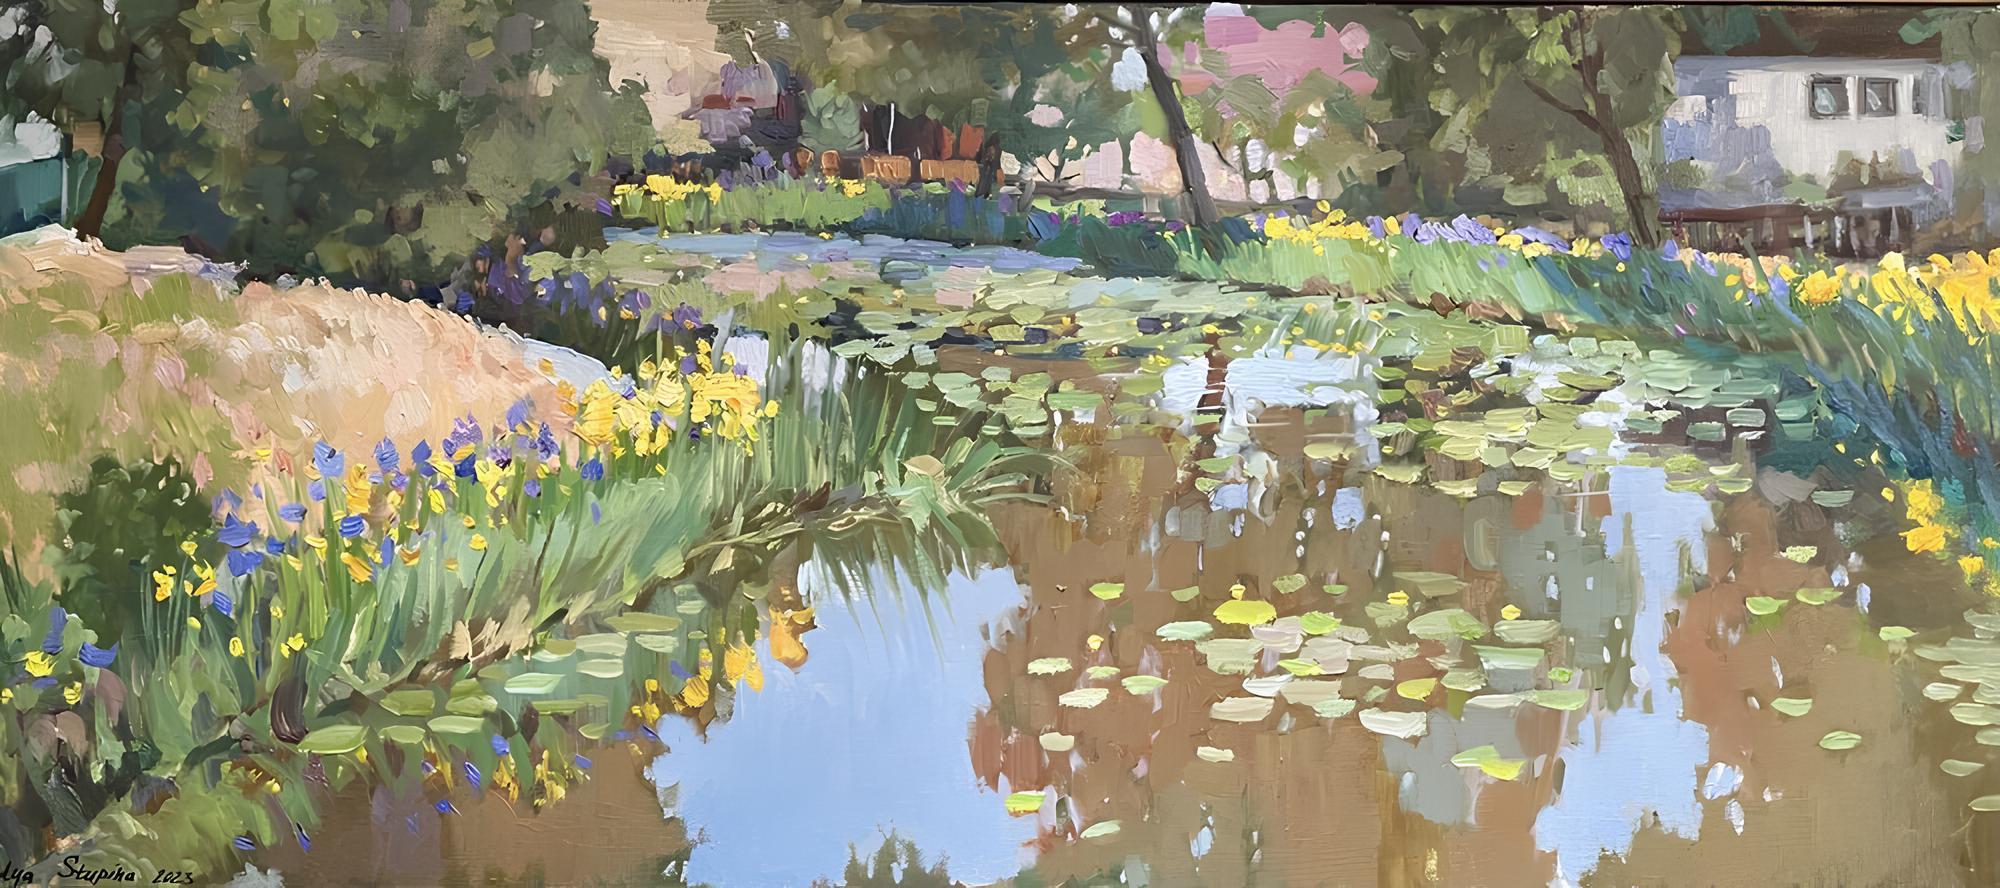 Nadezda Stupina Landscape Painting - A pond with water lilies and irises 3